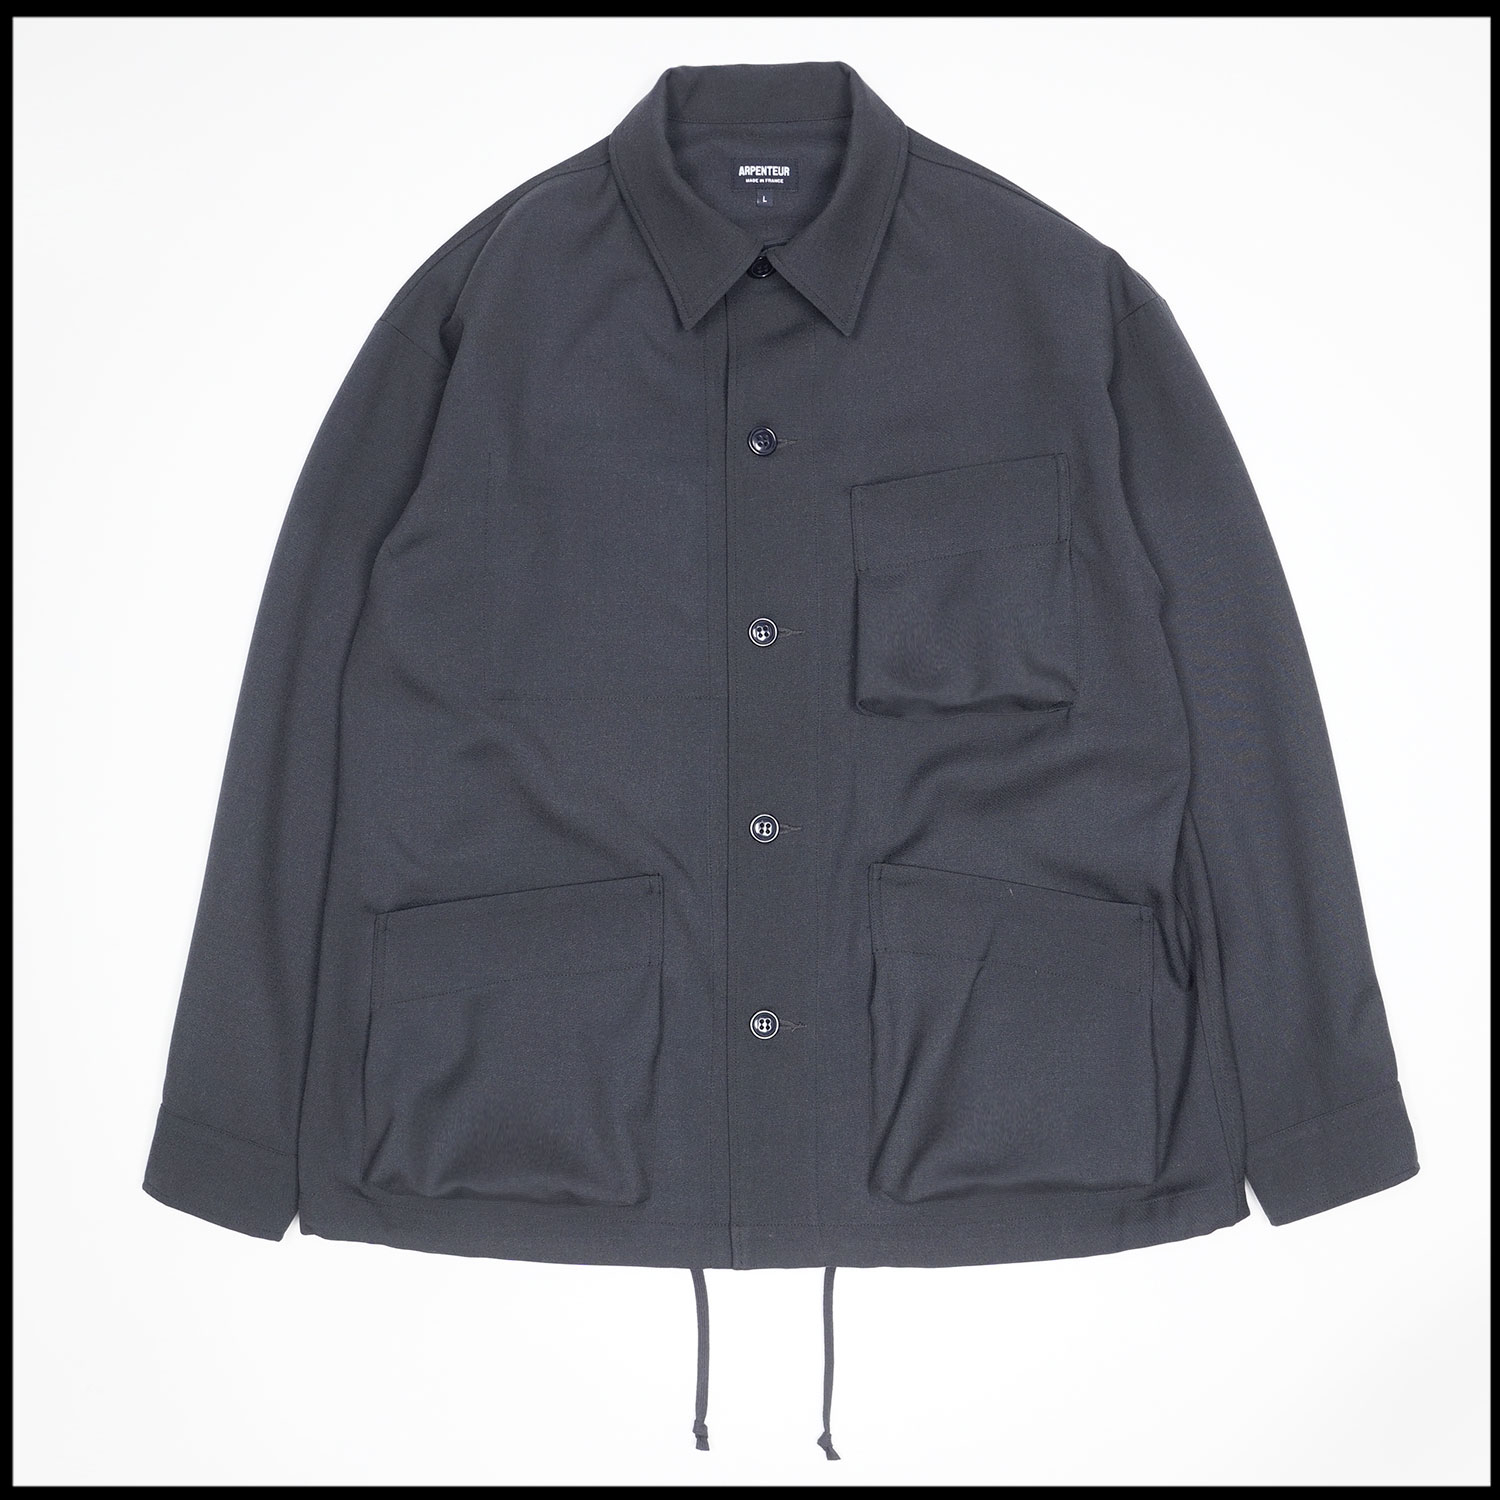 NIVA jacket in Midnight blue color by Arpenteur